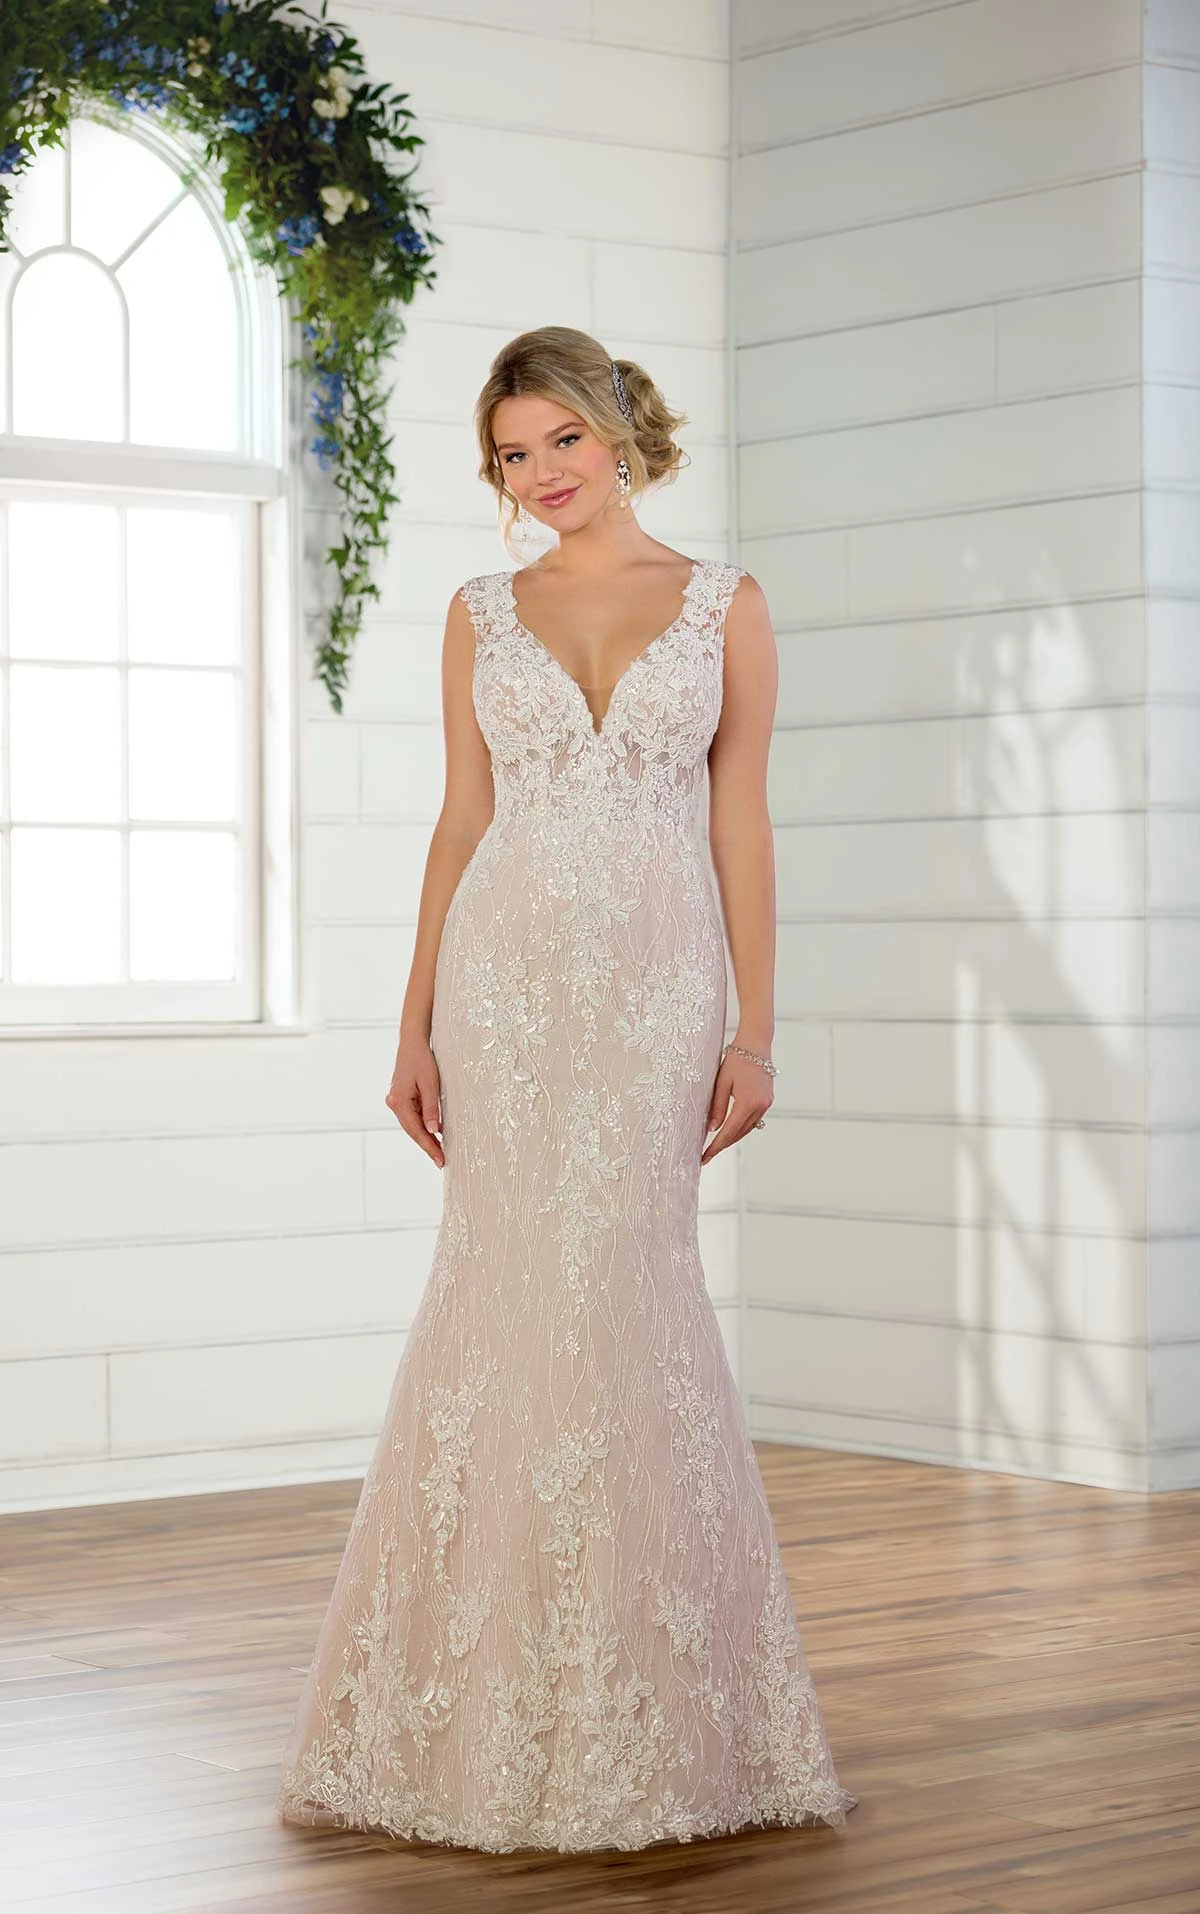 Lace Sparkly Fit and Flare Wedding Dress | Essense of ...